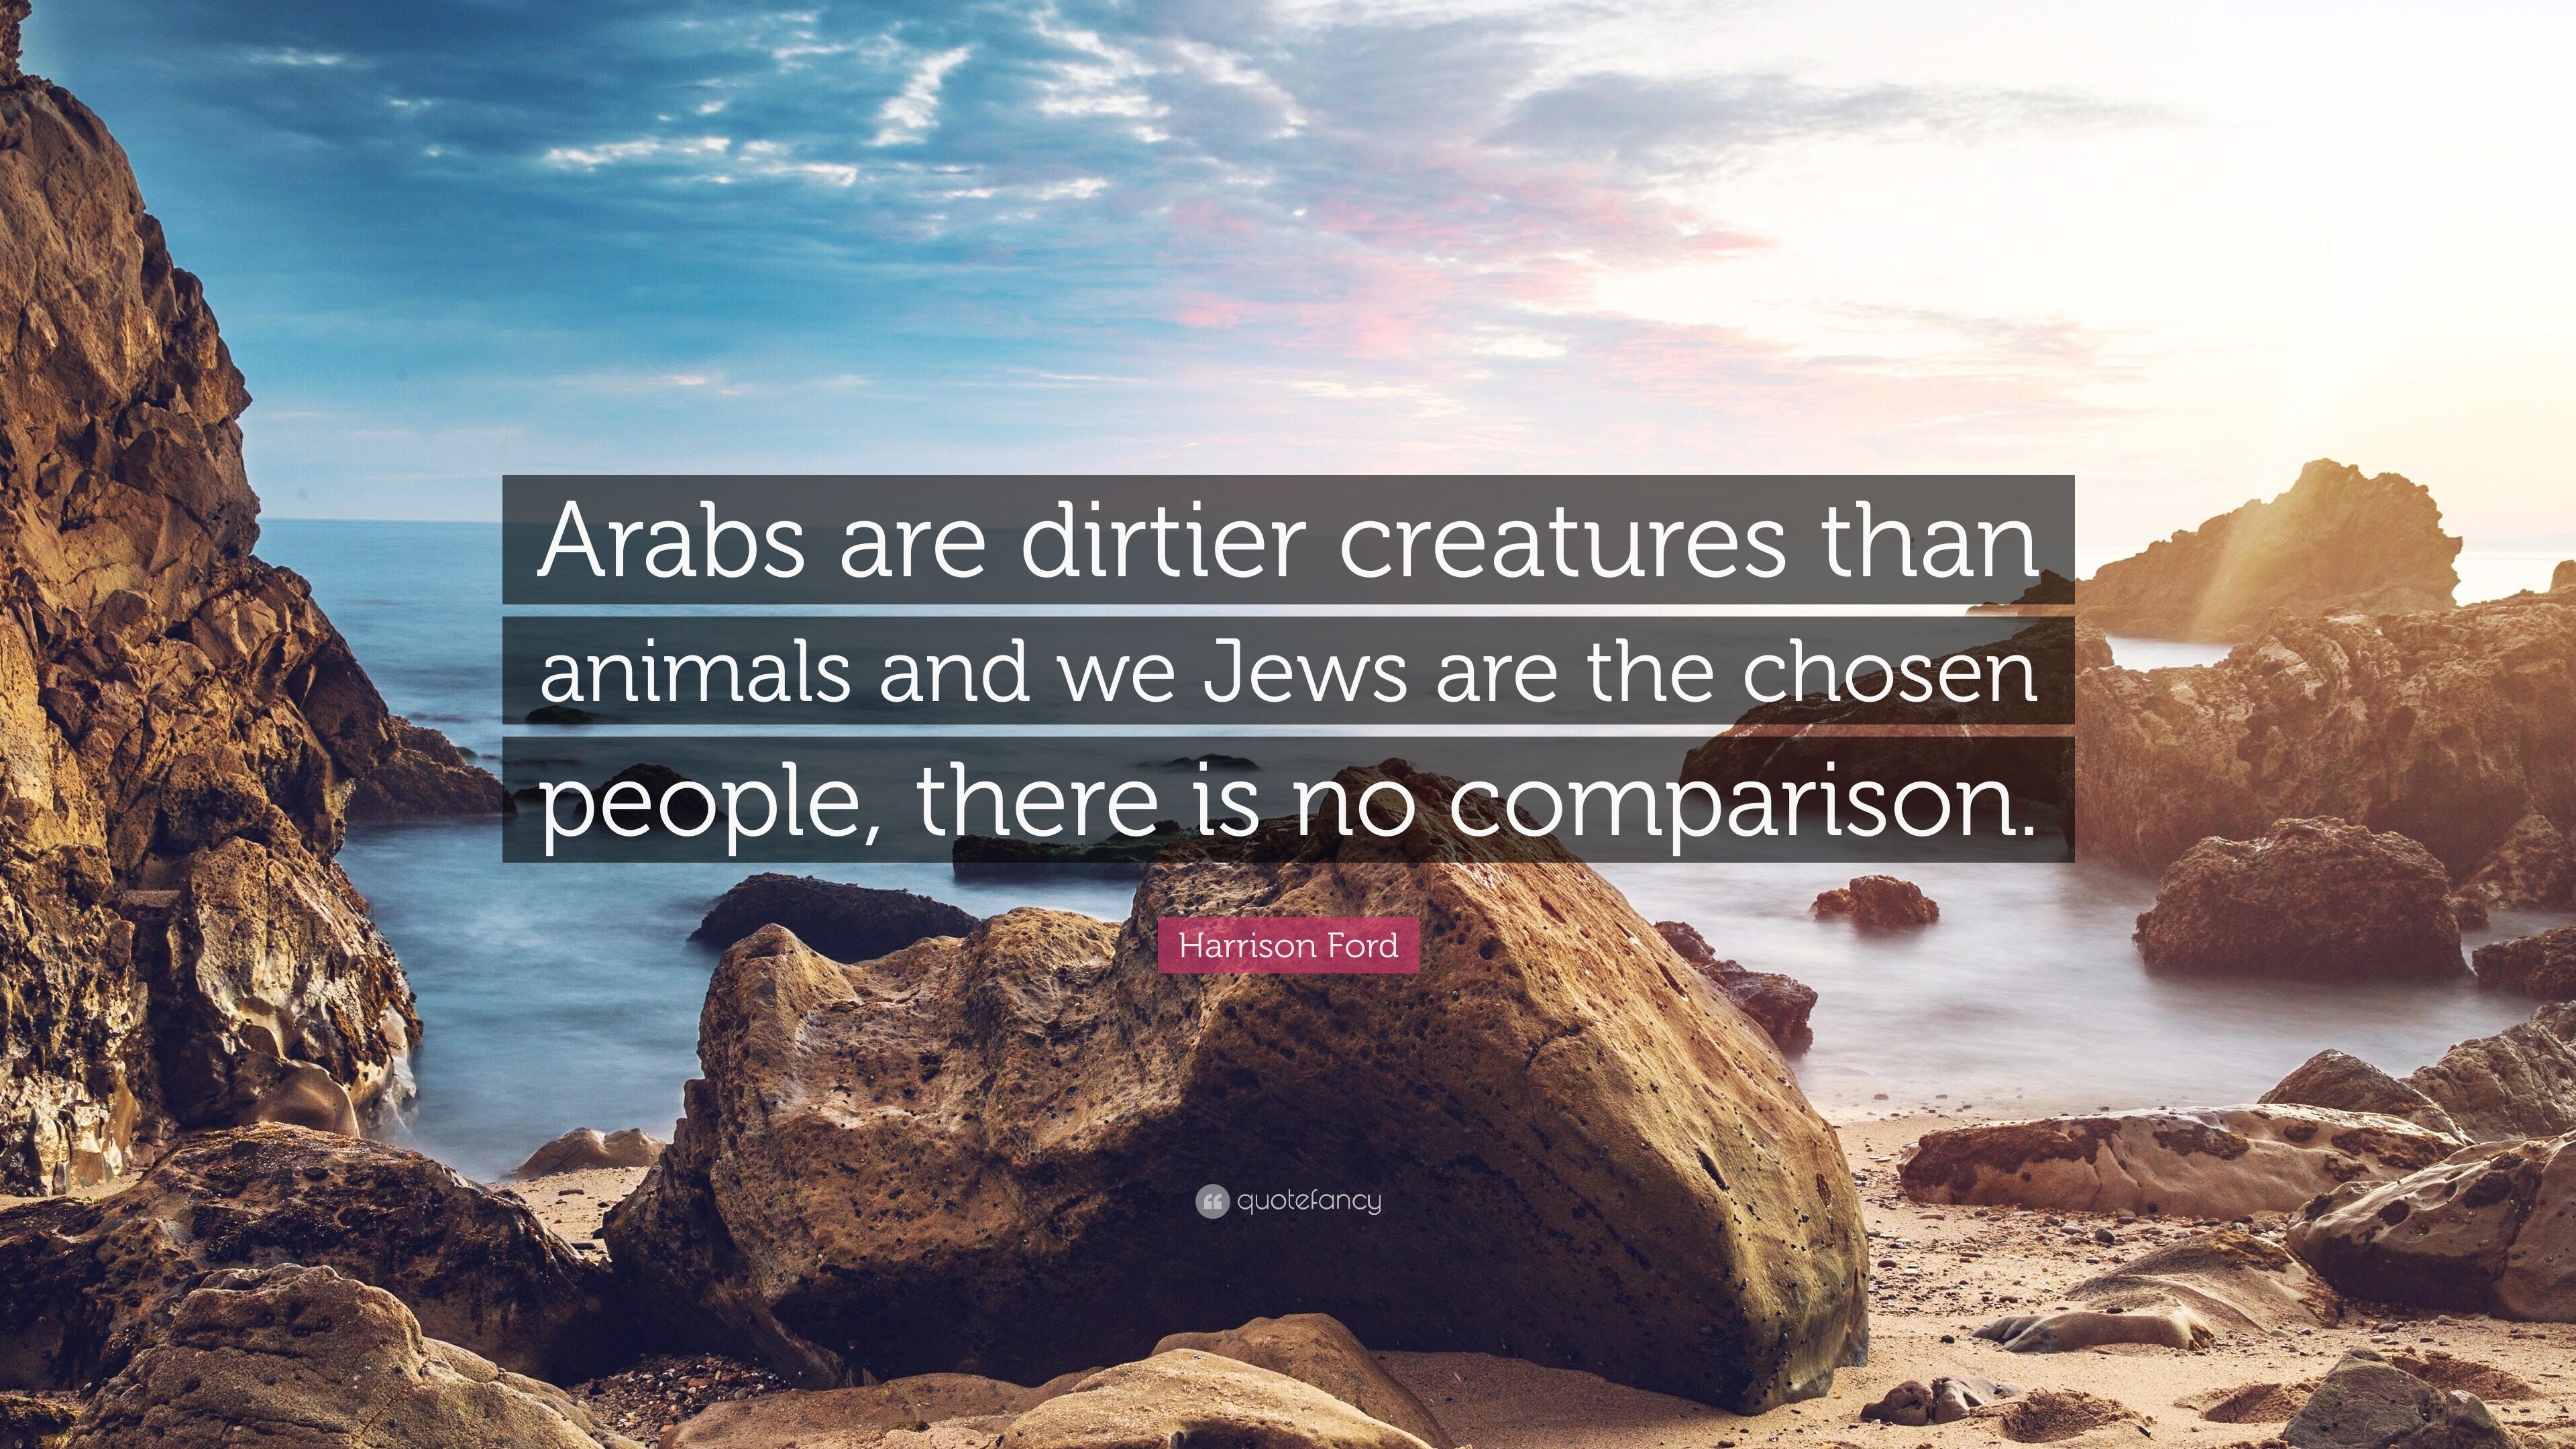 Harrison Ford Quote: “Arabs are dirtier creatures than animals and we Jews are the chosen people, there is no comparison.” (10 wallpaper)